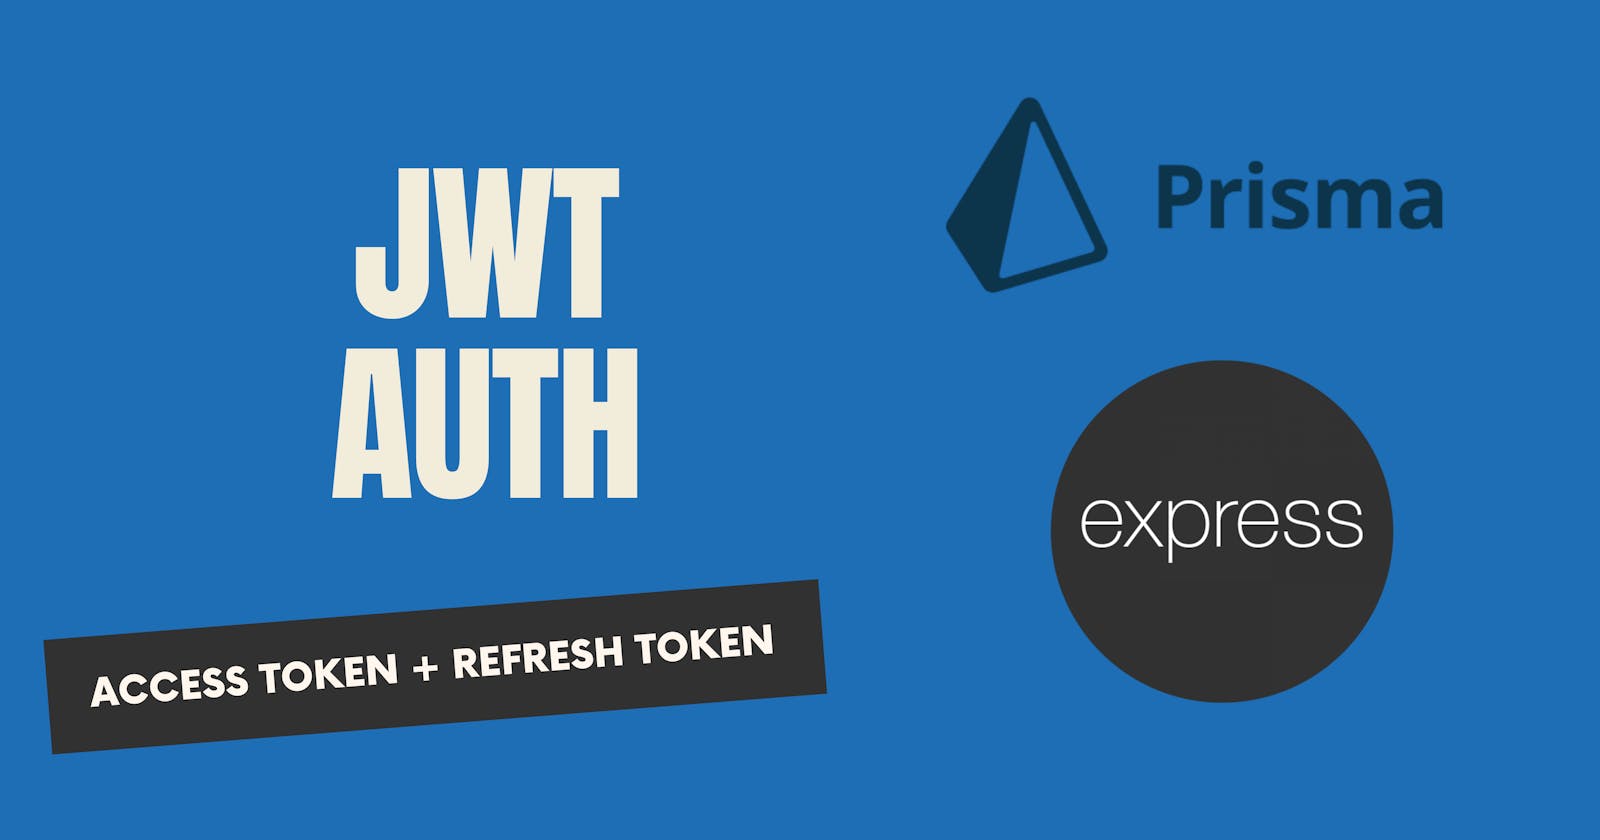 JWT Authentication using Prisma and Express